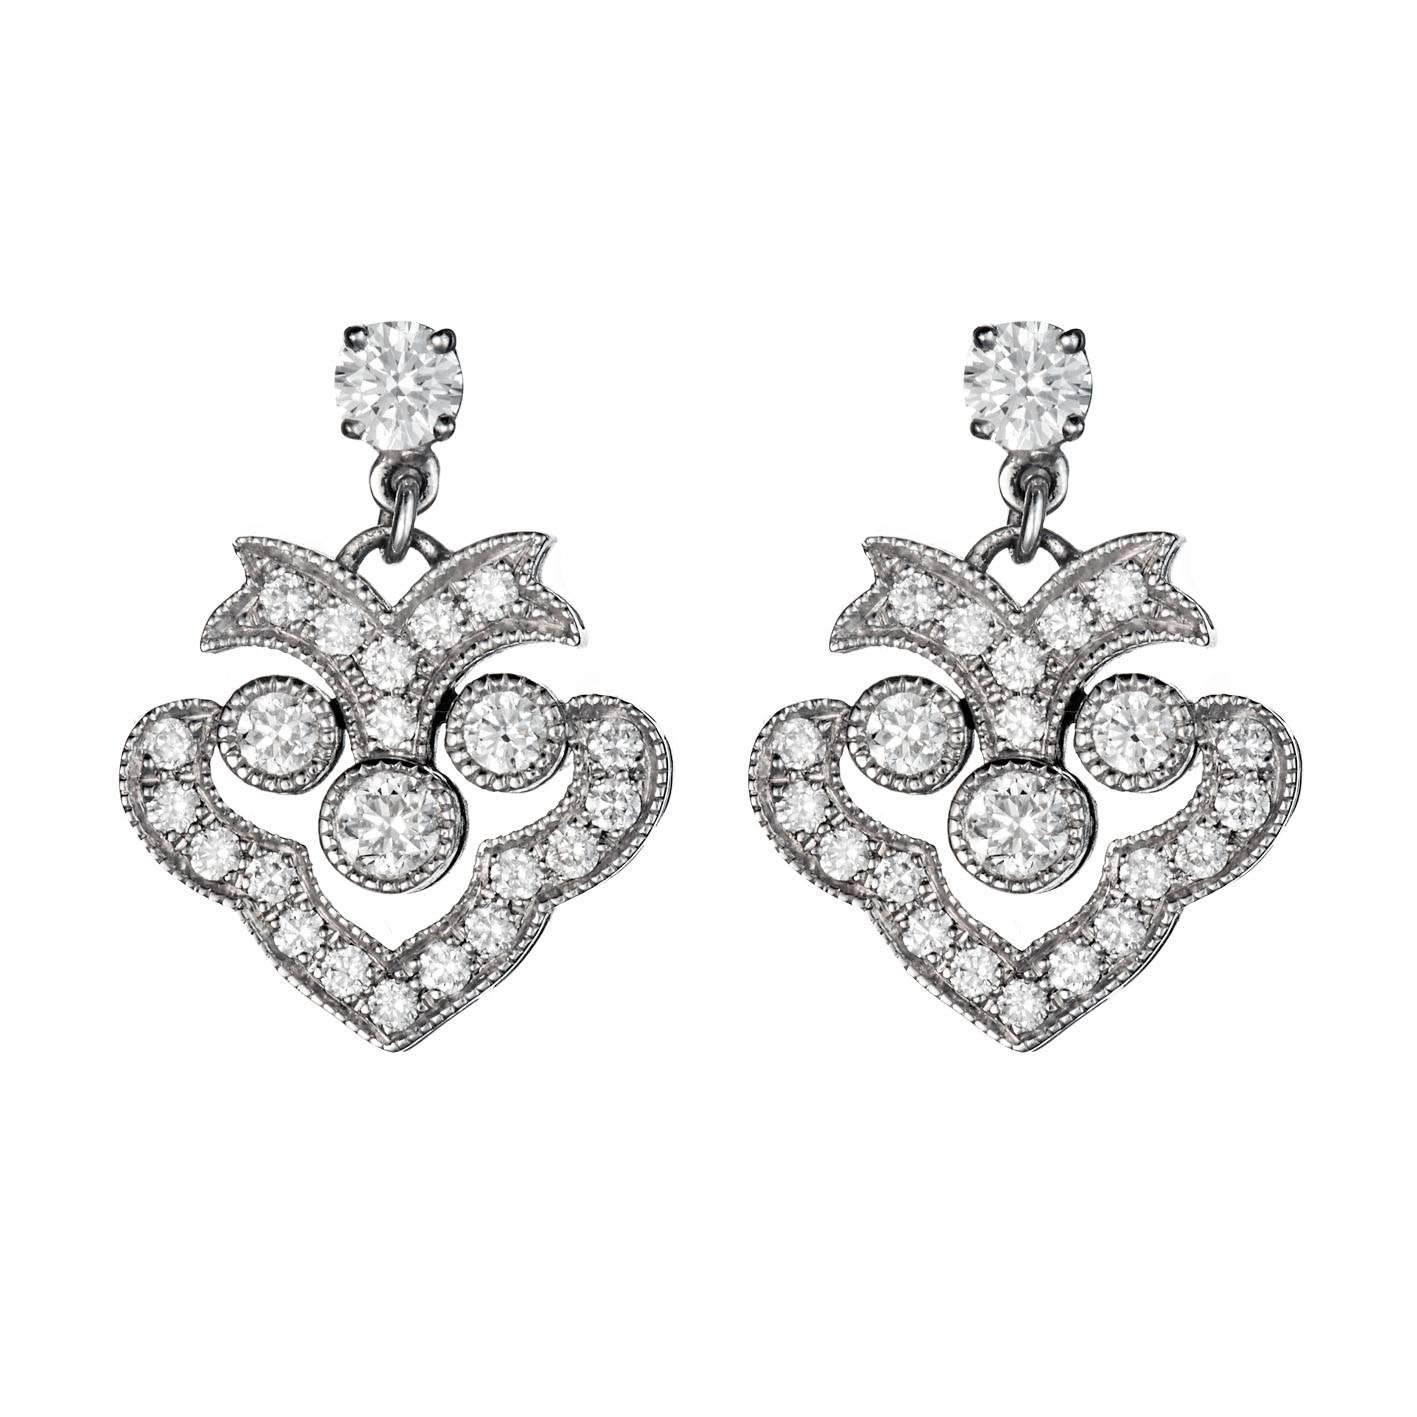 Pair of Eulalie Art Deco Style Diamond Earrings For Sale